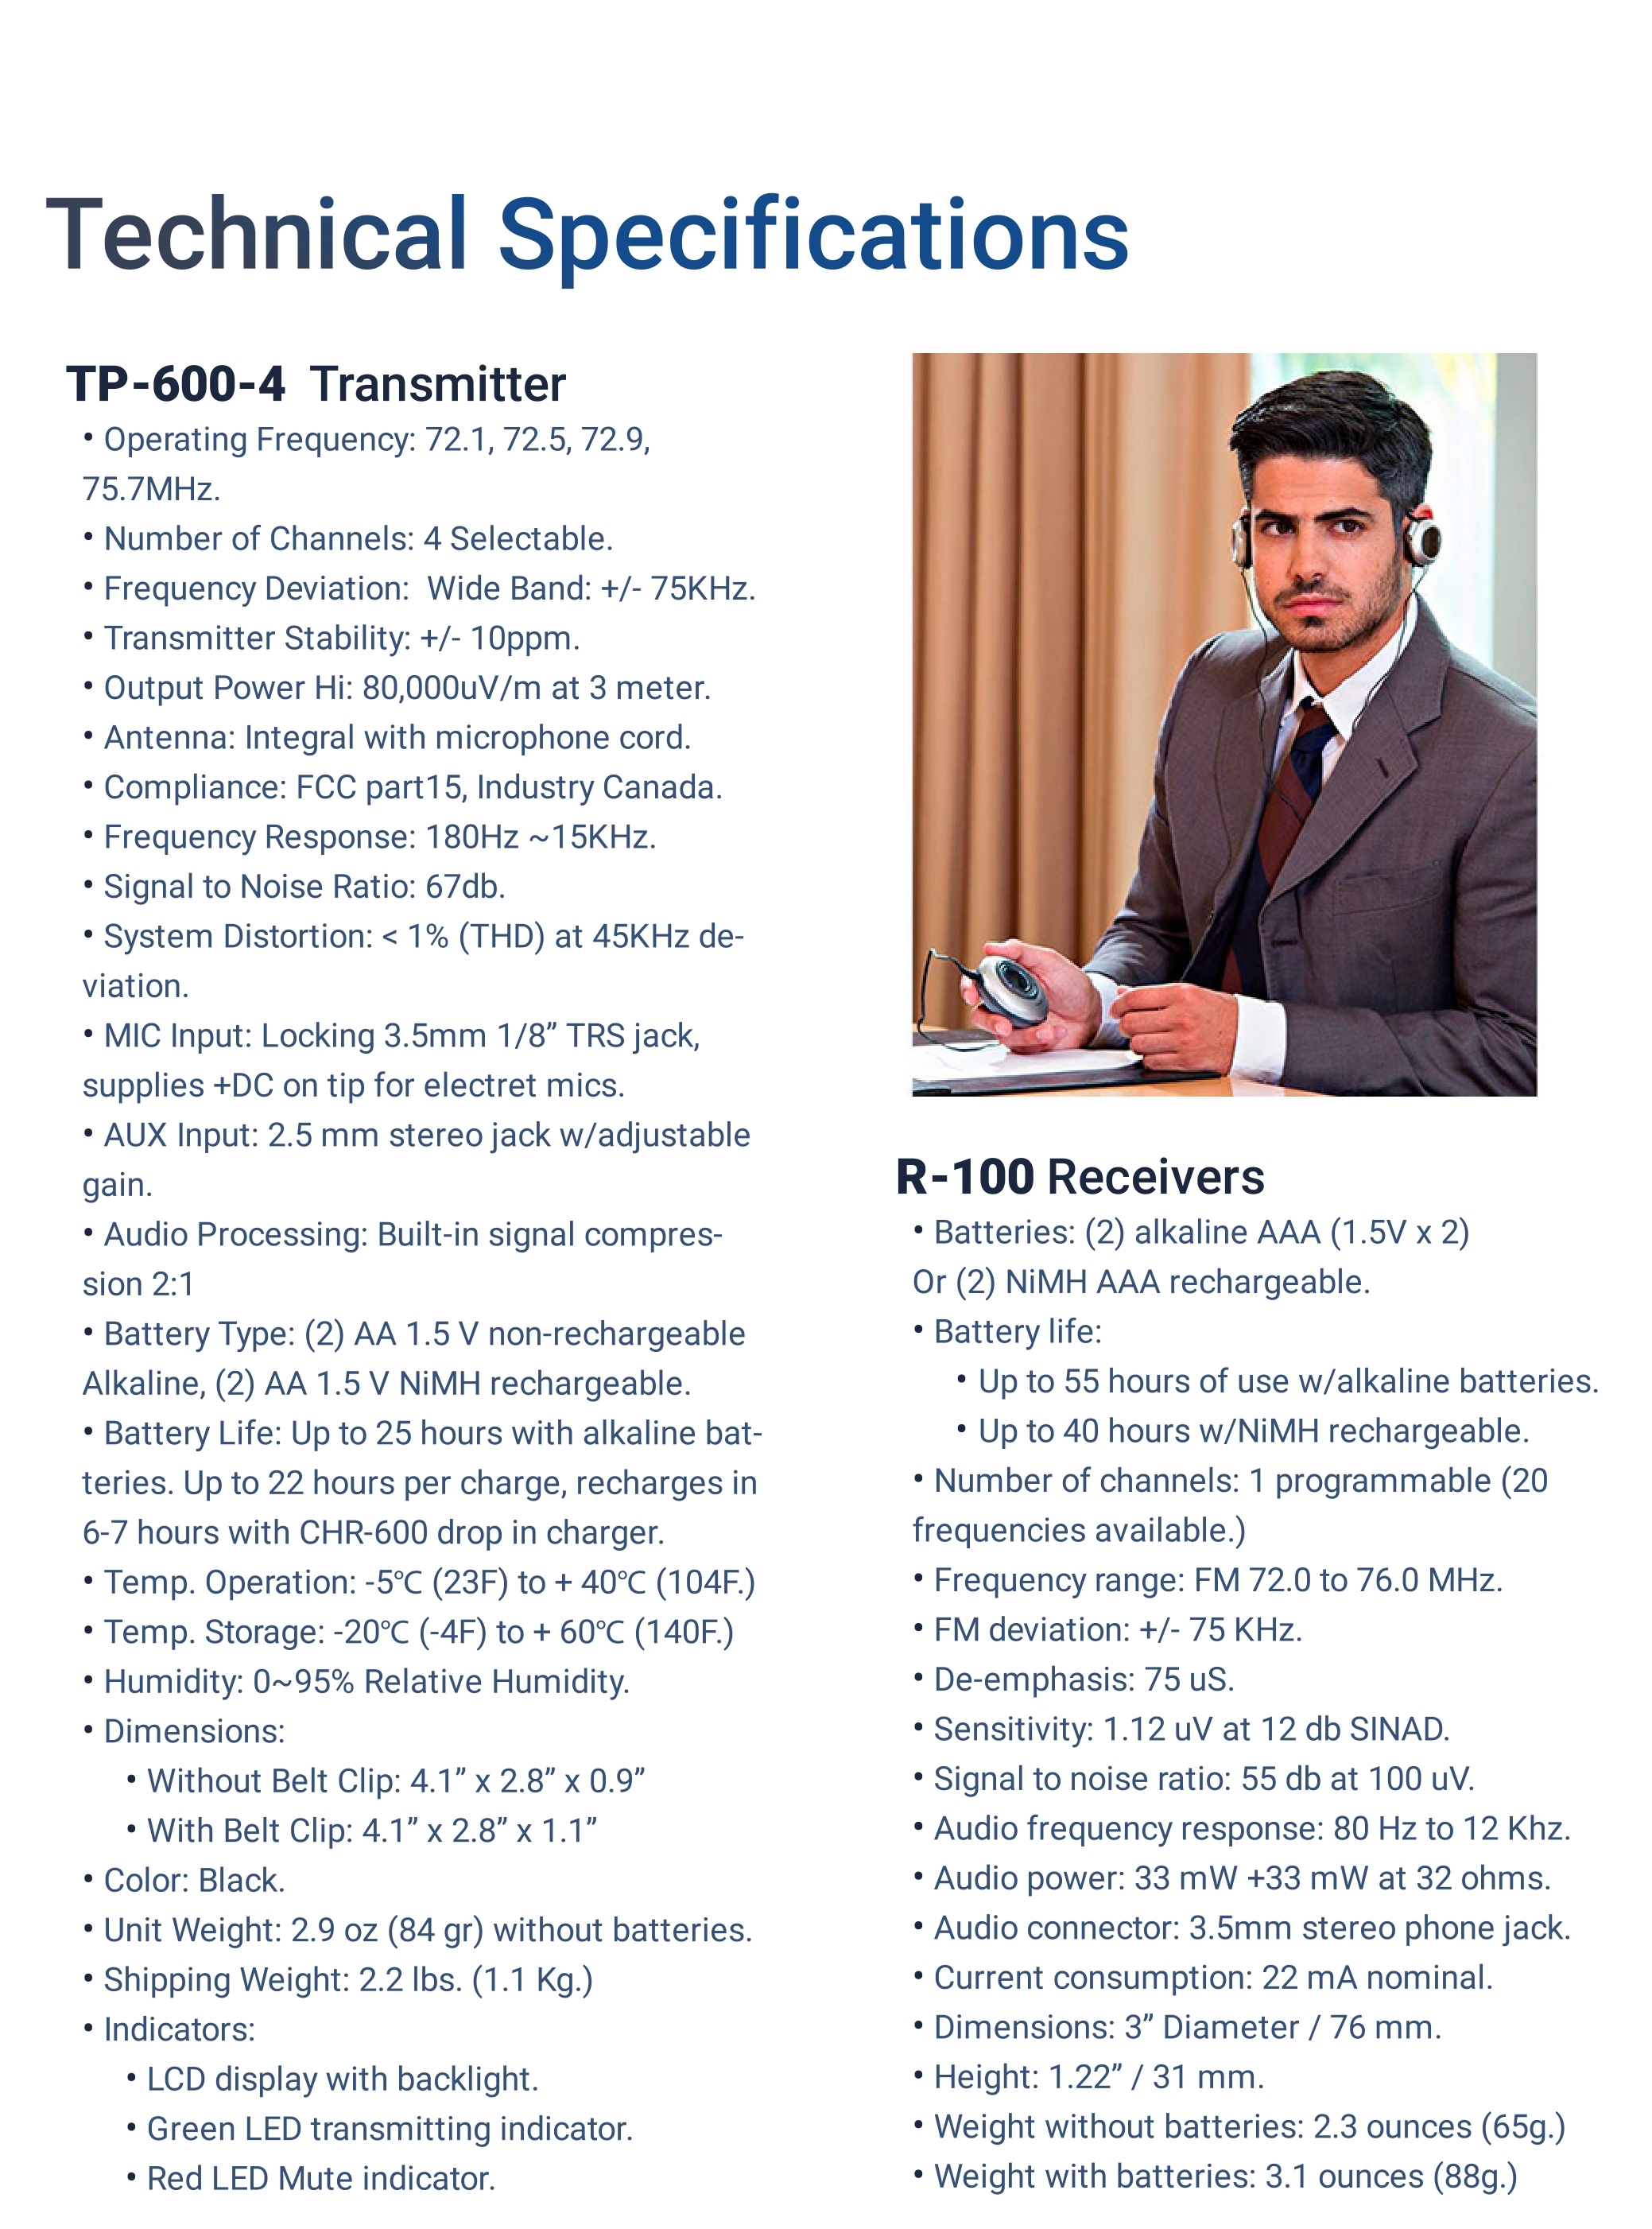 tsc-brochure-compressed-5-page-0001.jpg